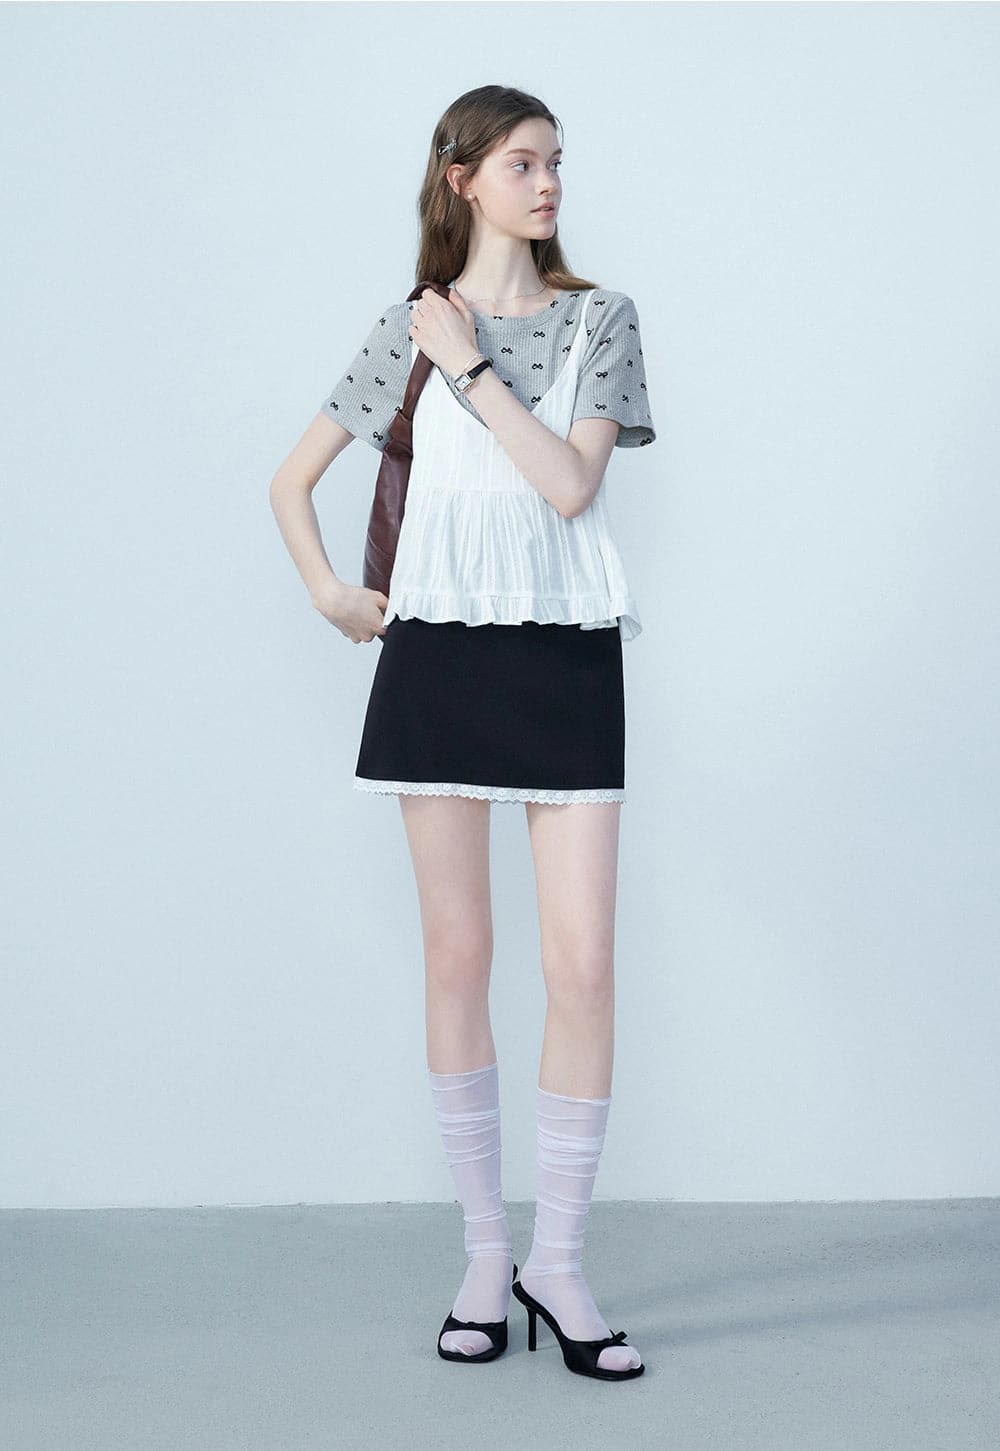 Chic Ribbed Short-Sleeve Top with Bow Motifs